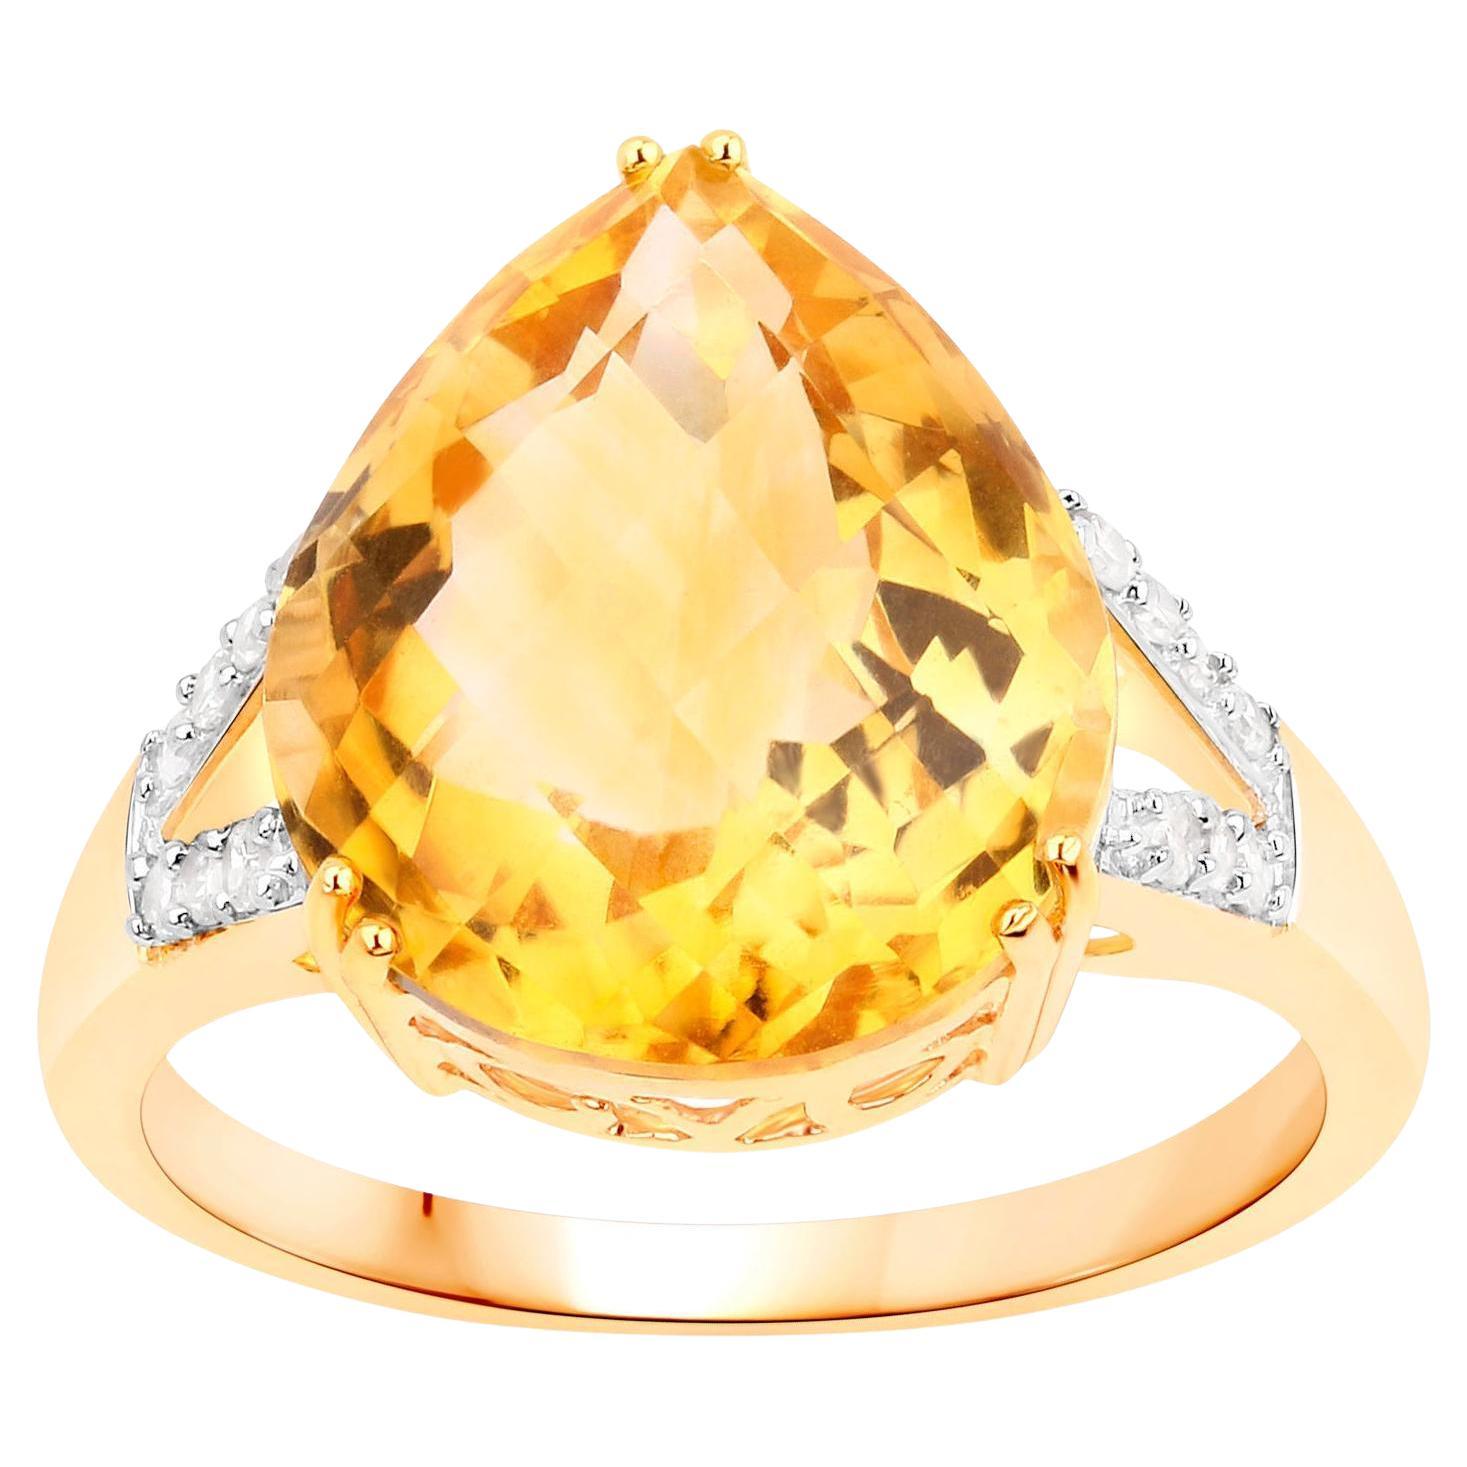 Citrine Ring With Diamonds 7.37 Carats 14K Yellow Gold